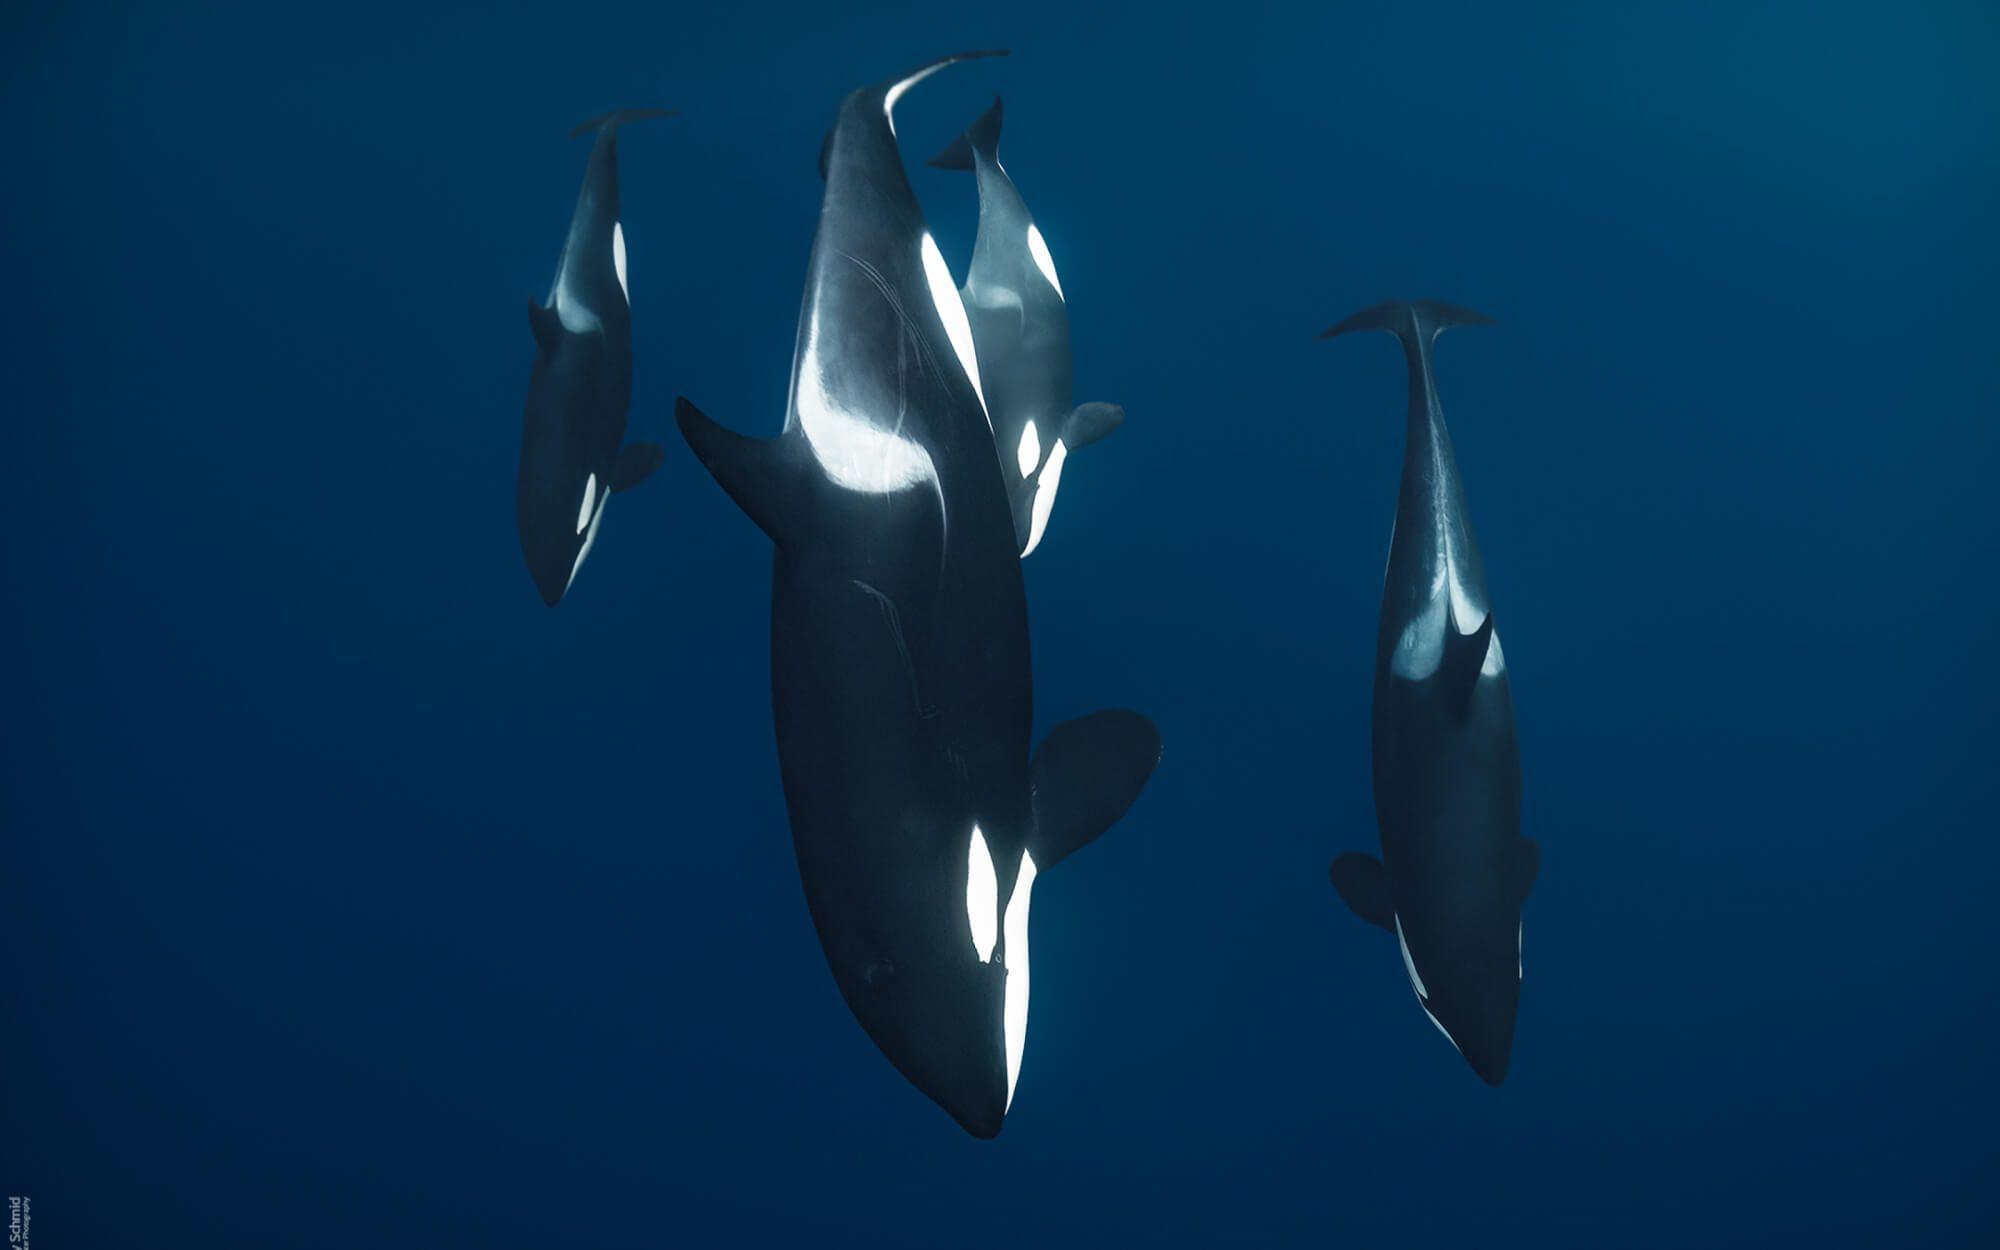 A pod of Orca whales dive into the ocean depths. While most subspecies of Orca whales have strong populations, Southern Resident killer whales are endangered.
Photographer: Andreas Schmid